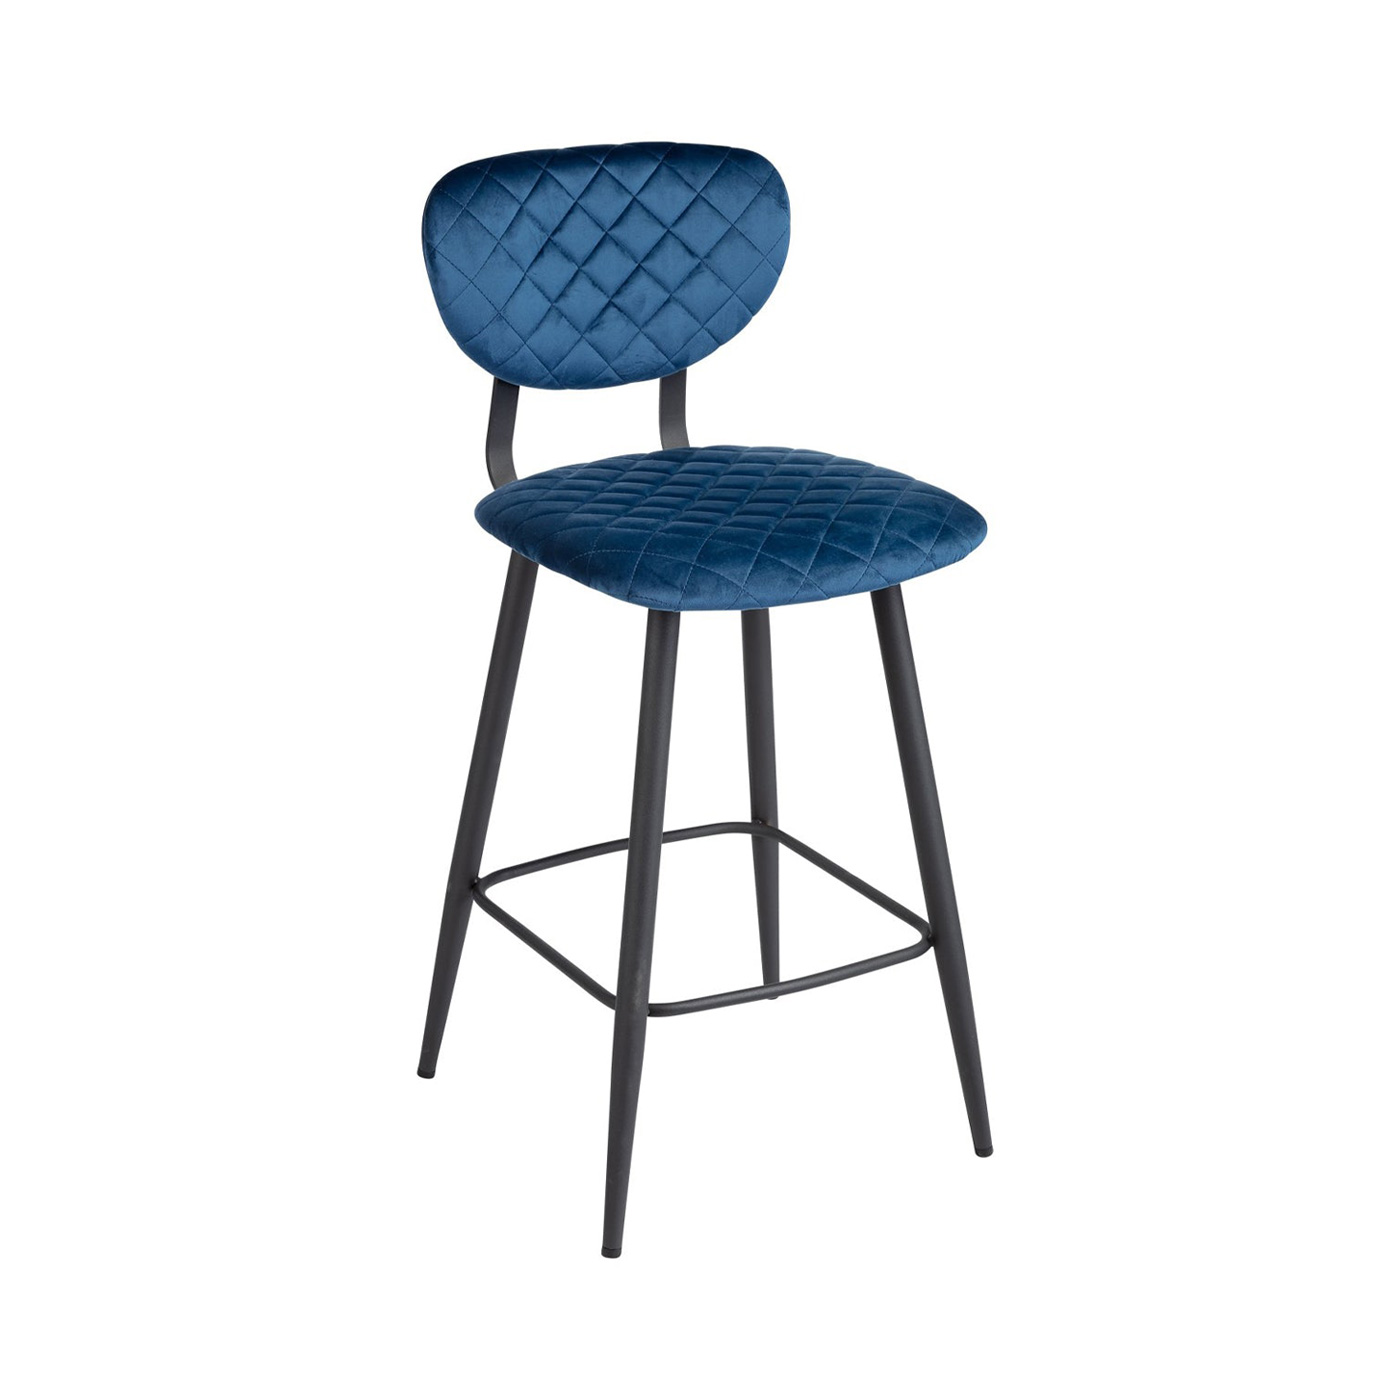 Bar Stools - A Great Match For Your Kitchen Island Or Bar